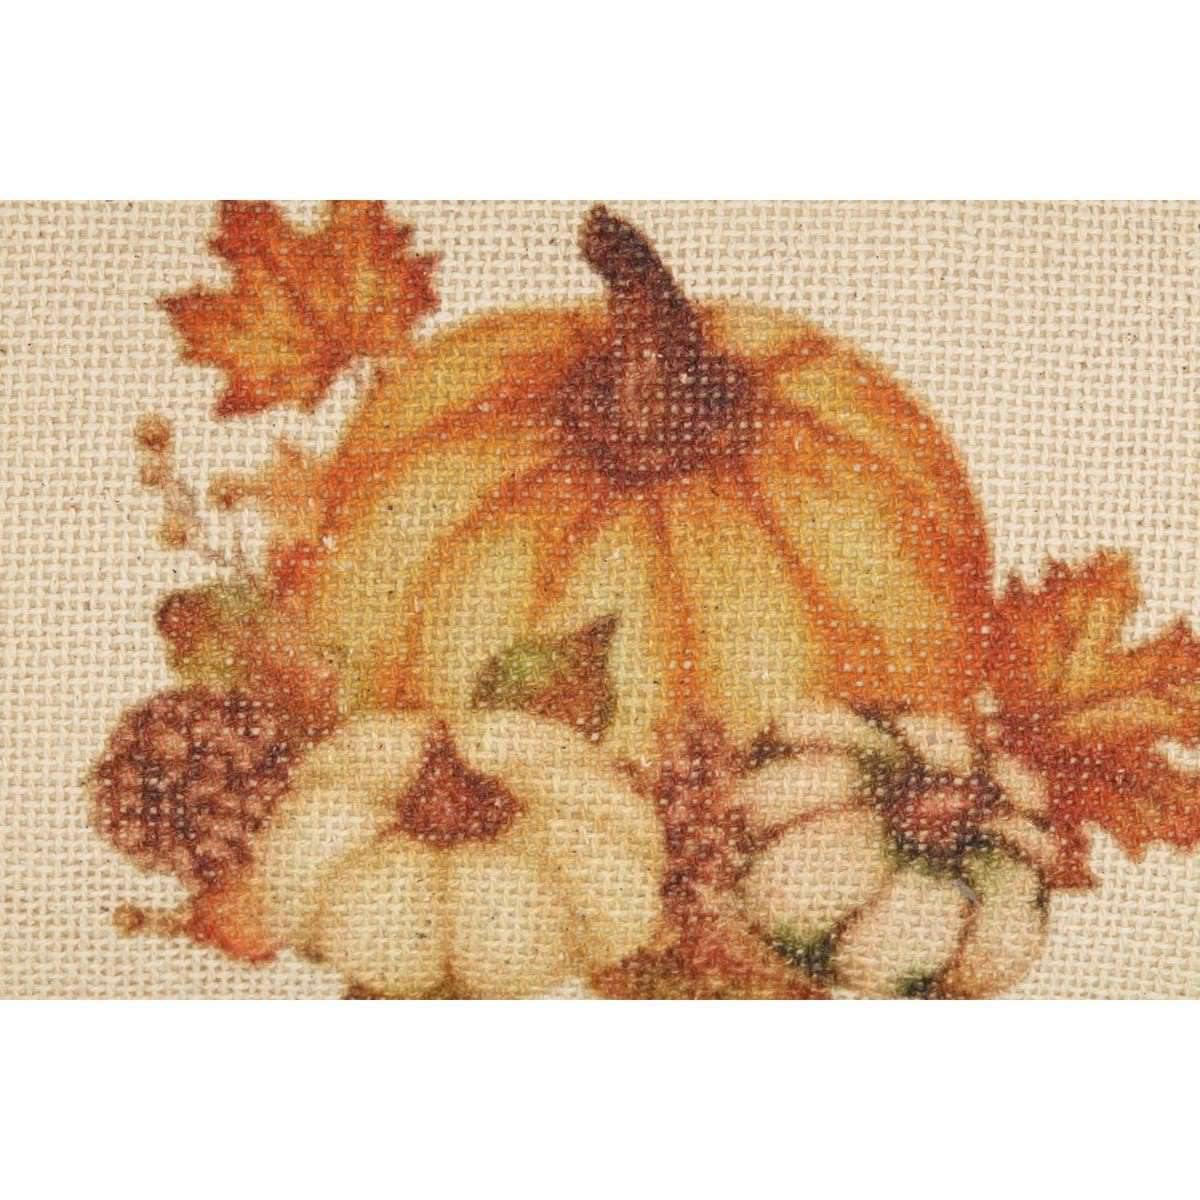 Fall on the Farm Pumpkin Patch Pillow 14x22 VHC Brands zoom